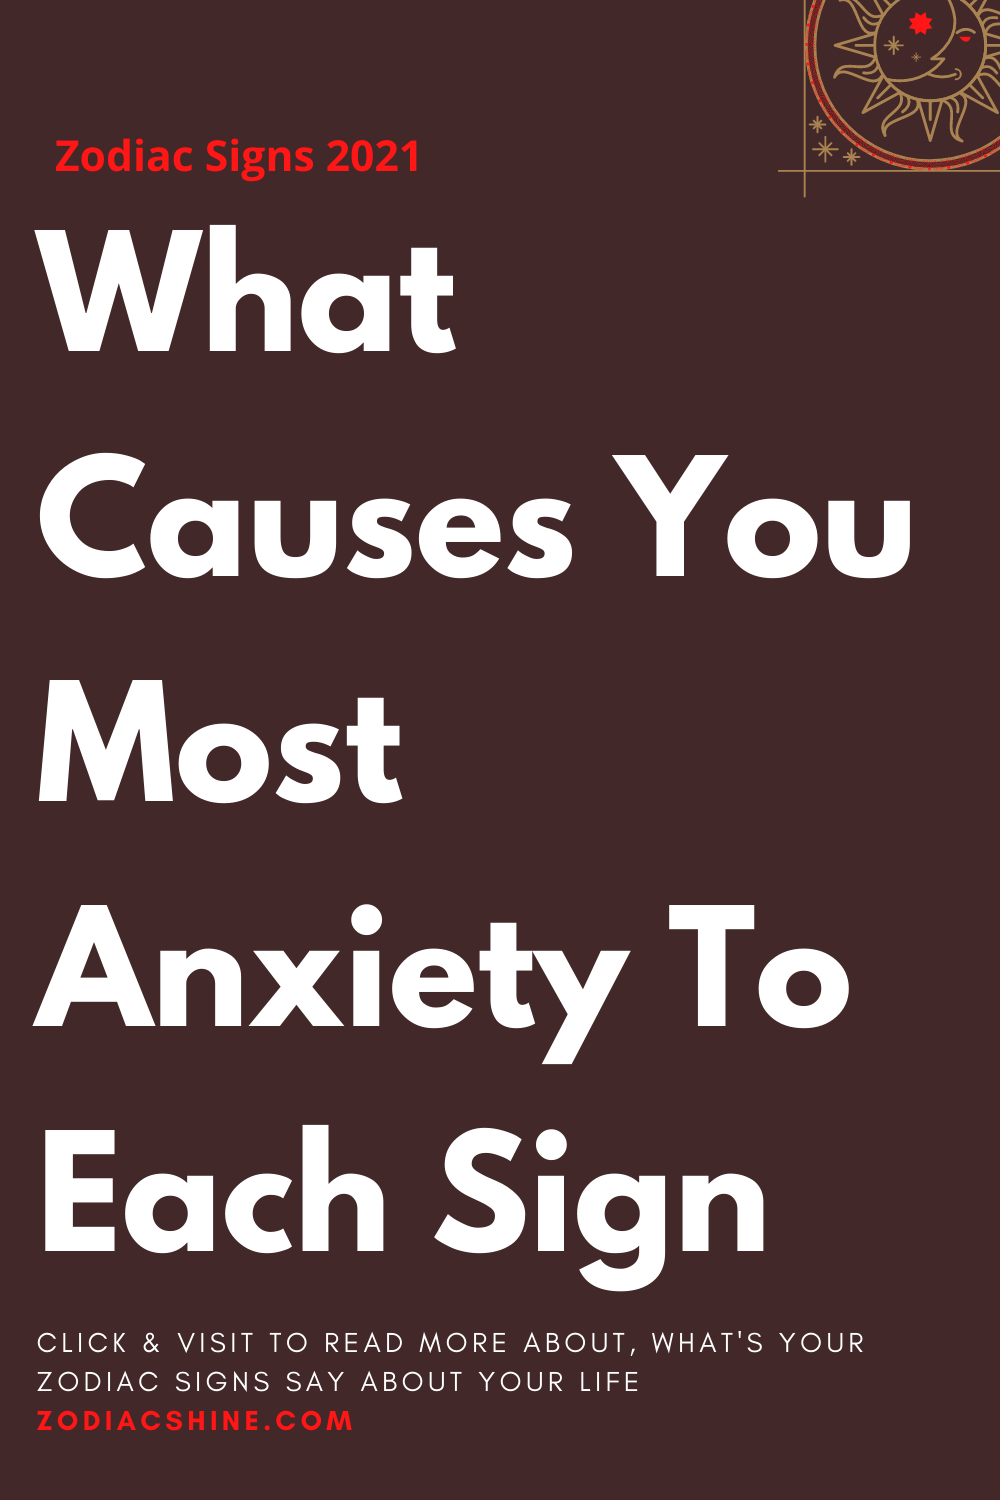 What Causes You Most Anxiety To Each Sign